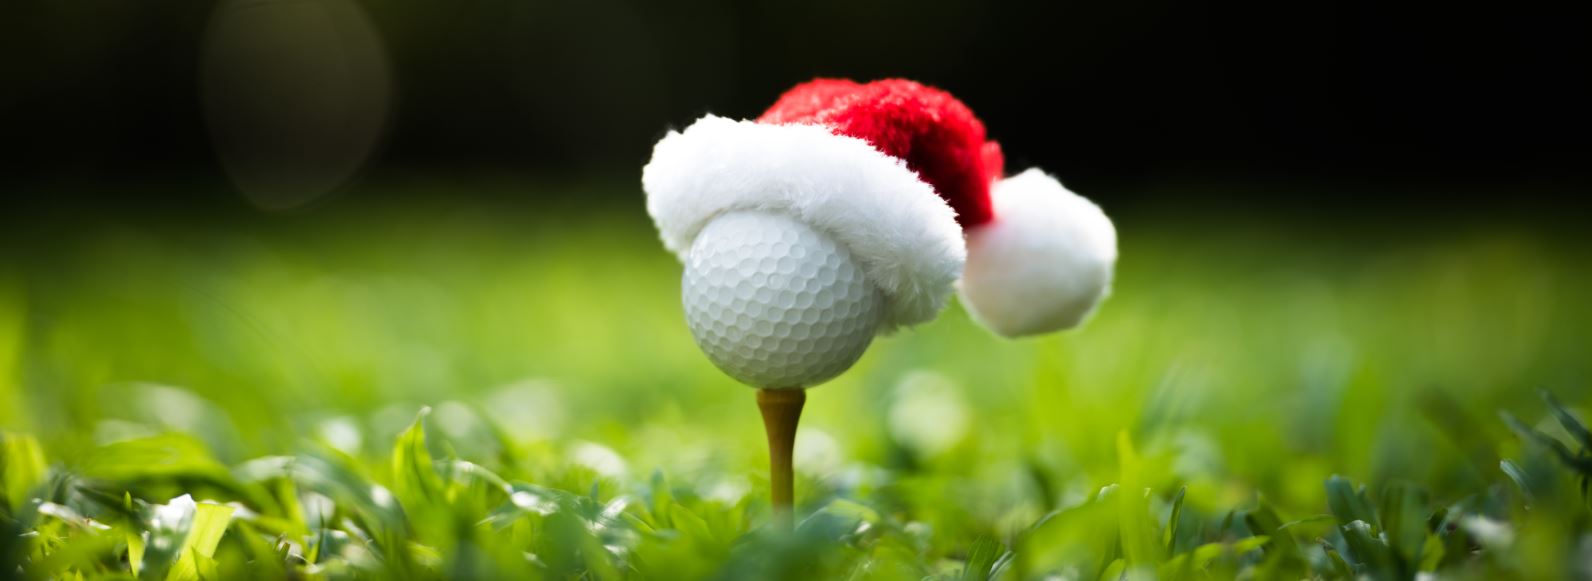 Golf Gifts